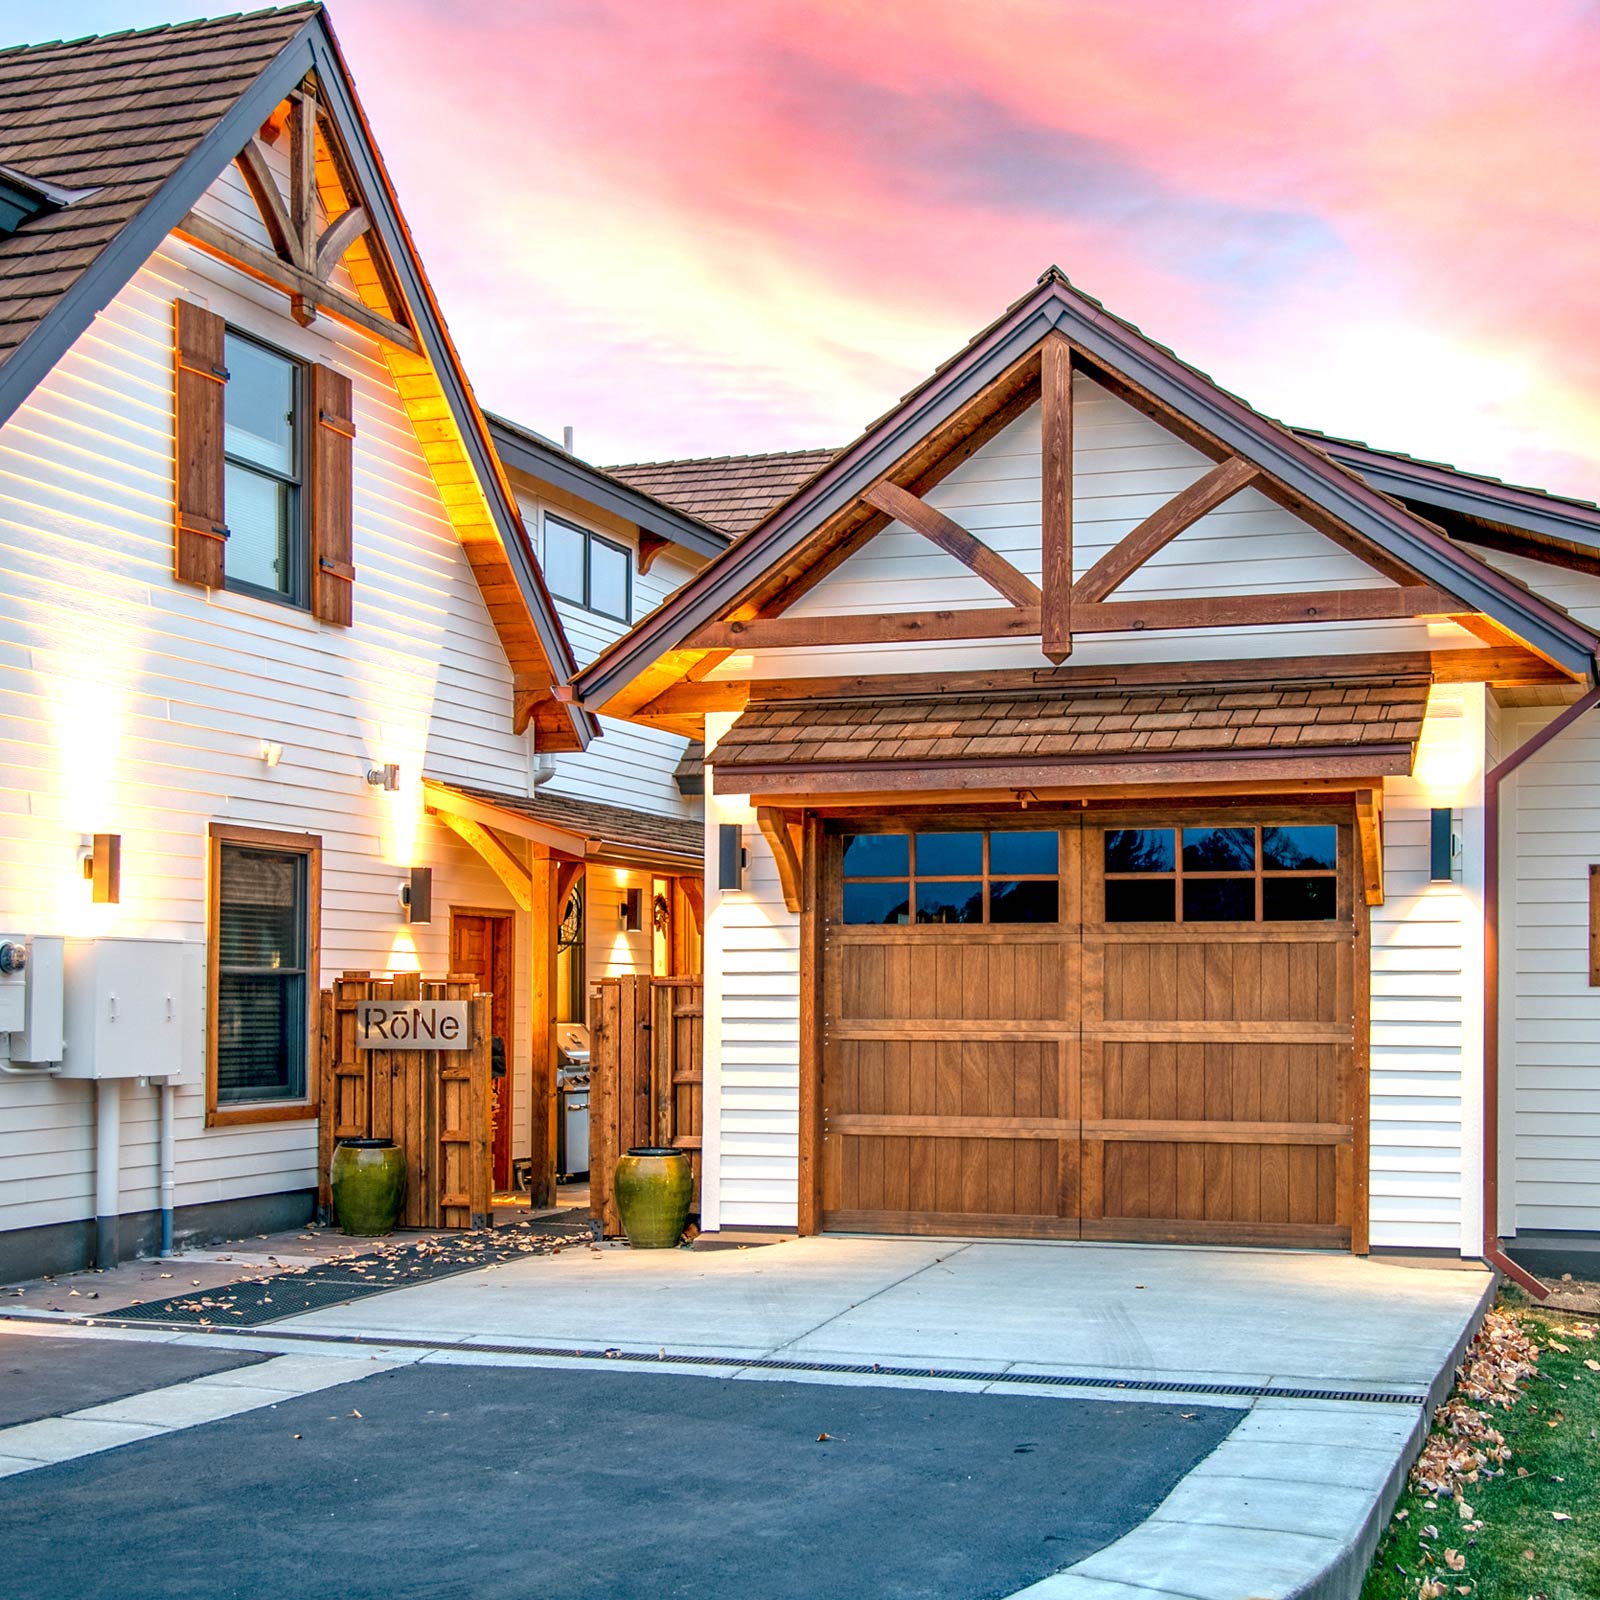 Craftsman Style Architecture 2022 Trends